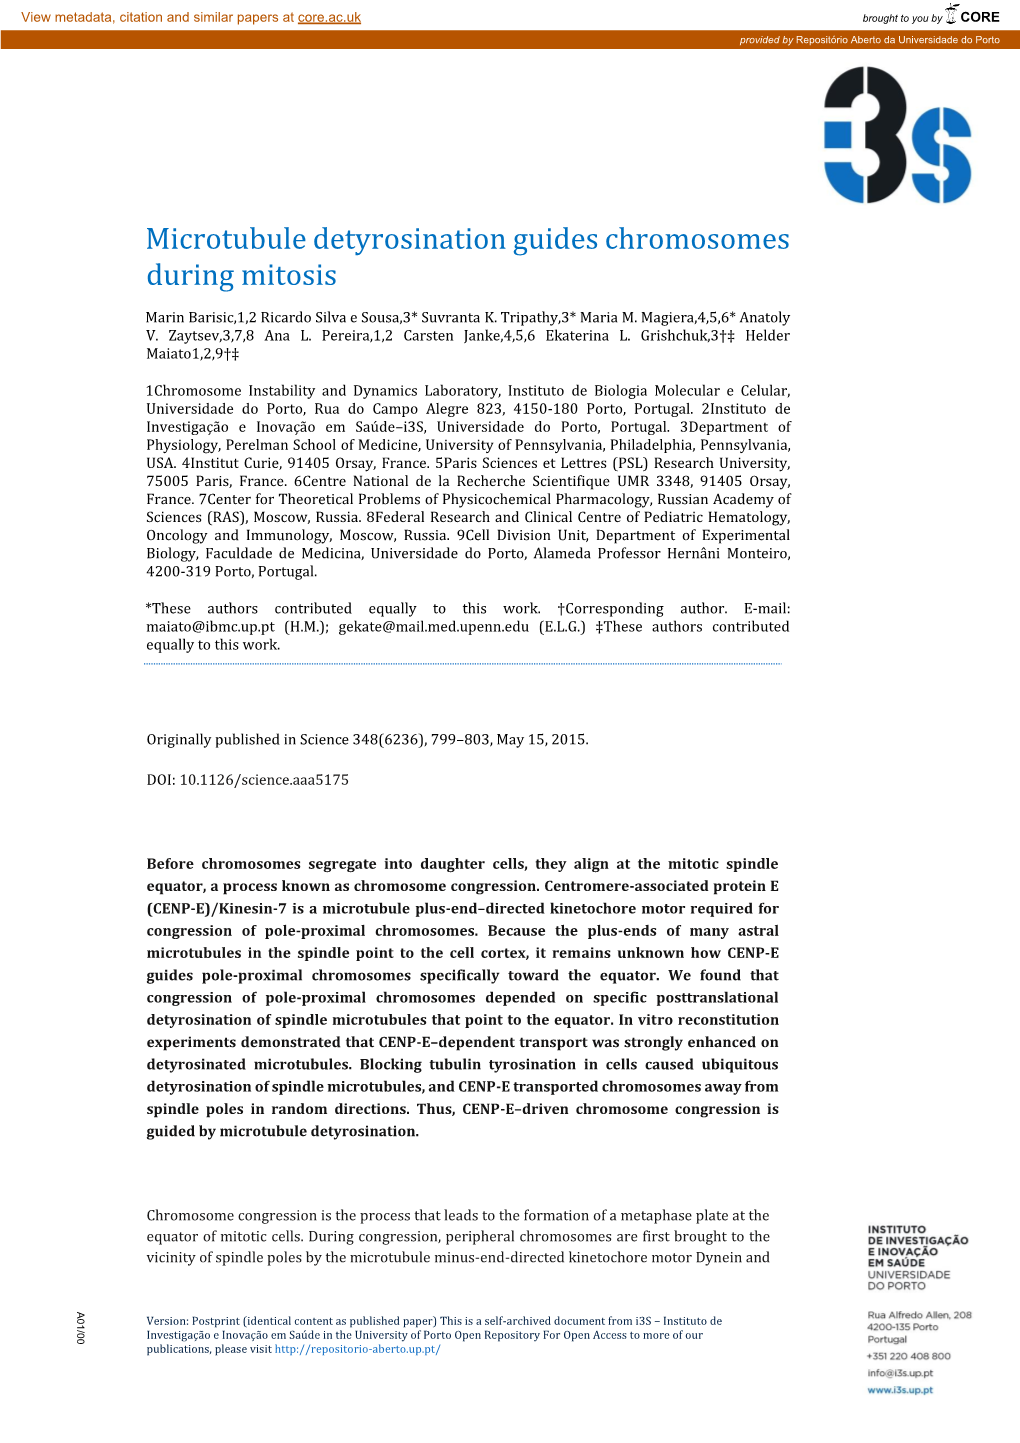 Microtubule Detyrosination Guides Chromosomes During Mitosis